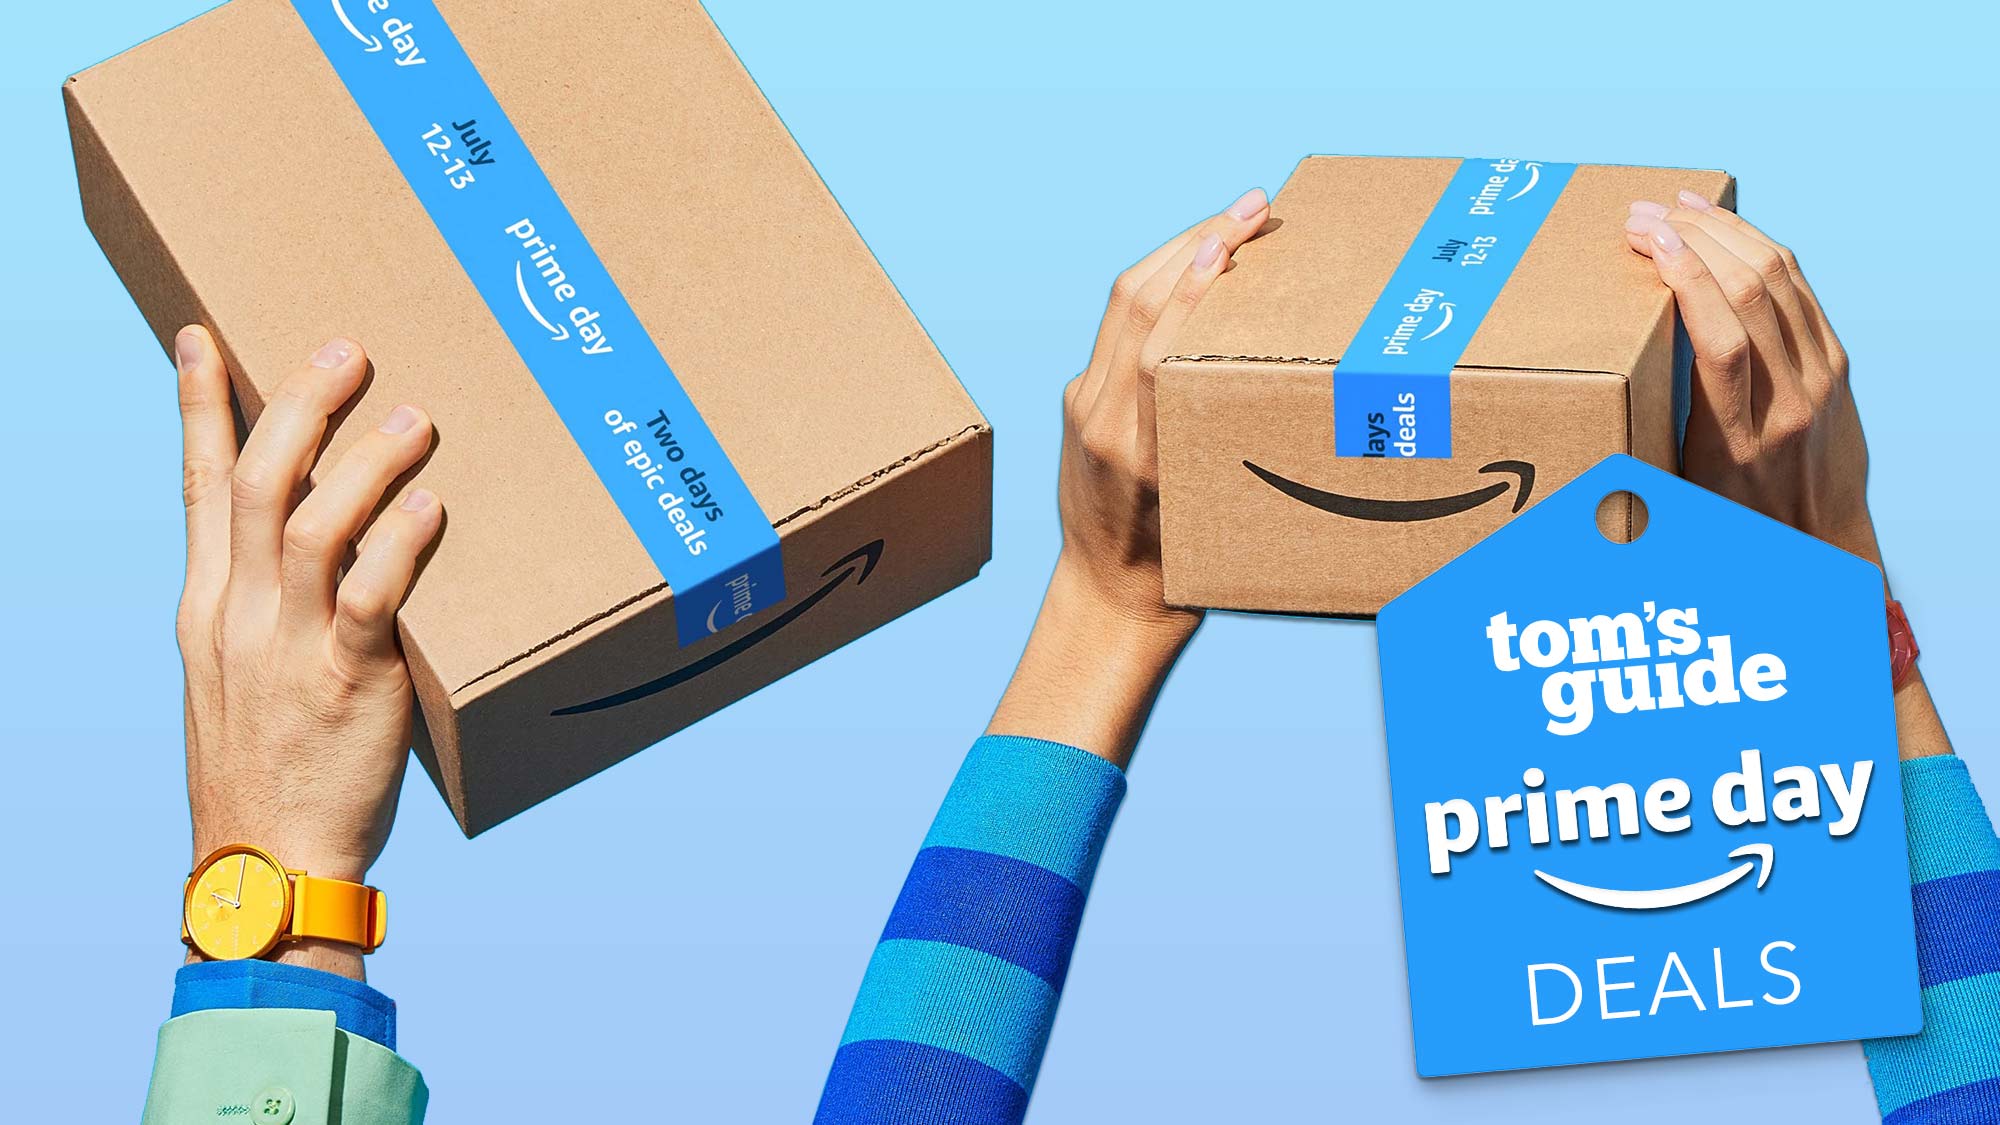 s October Prime Day deals come to an end. How good were they?